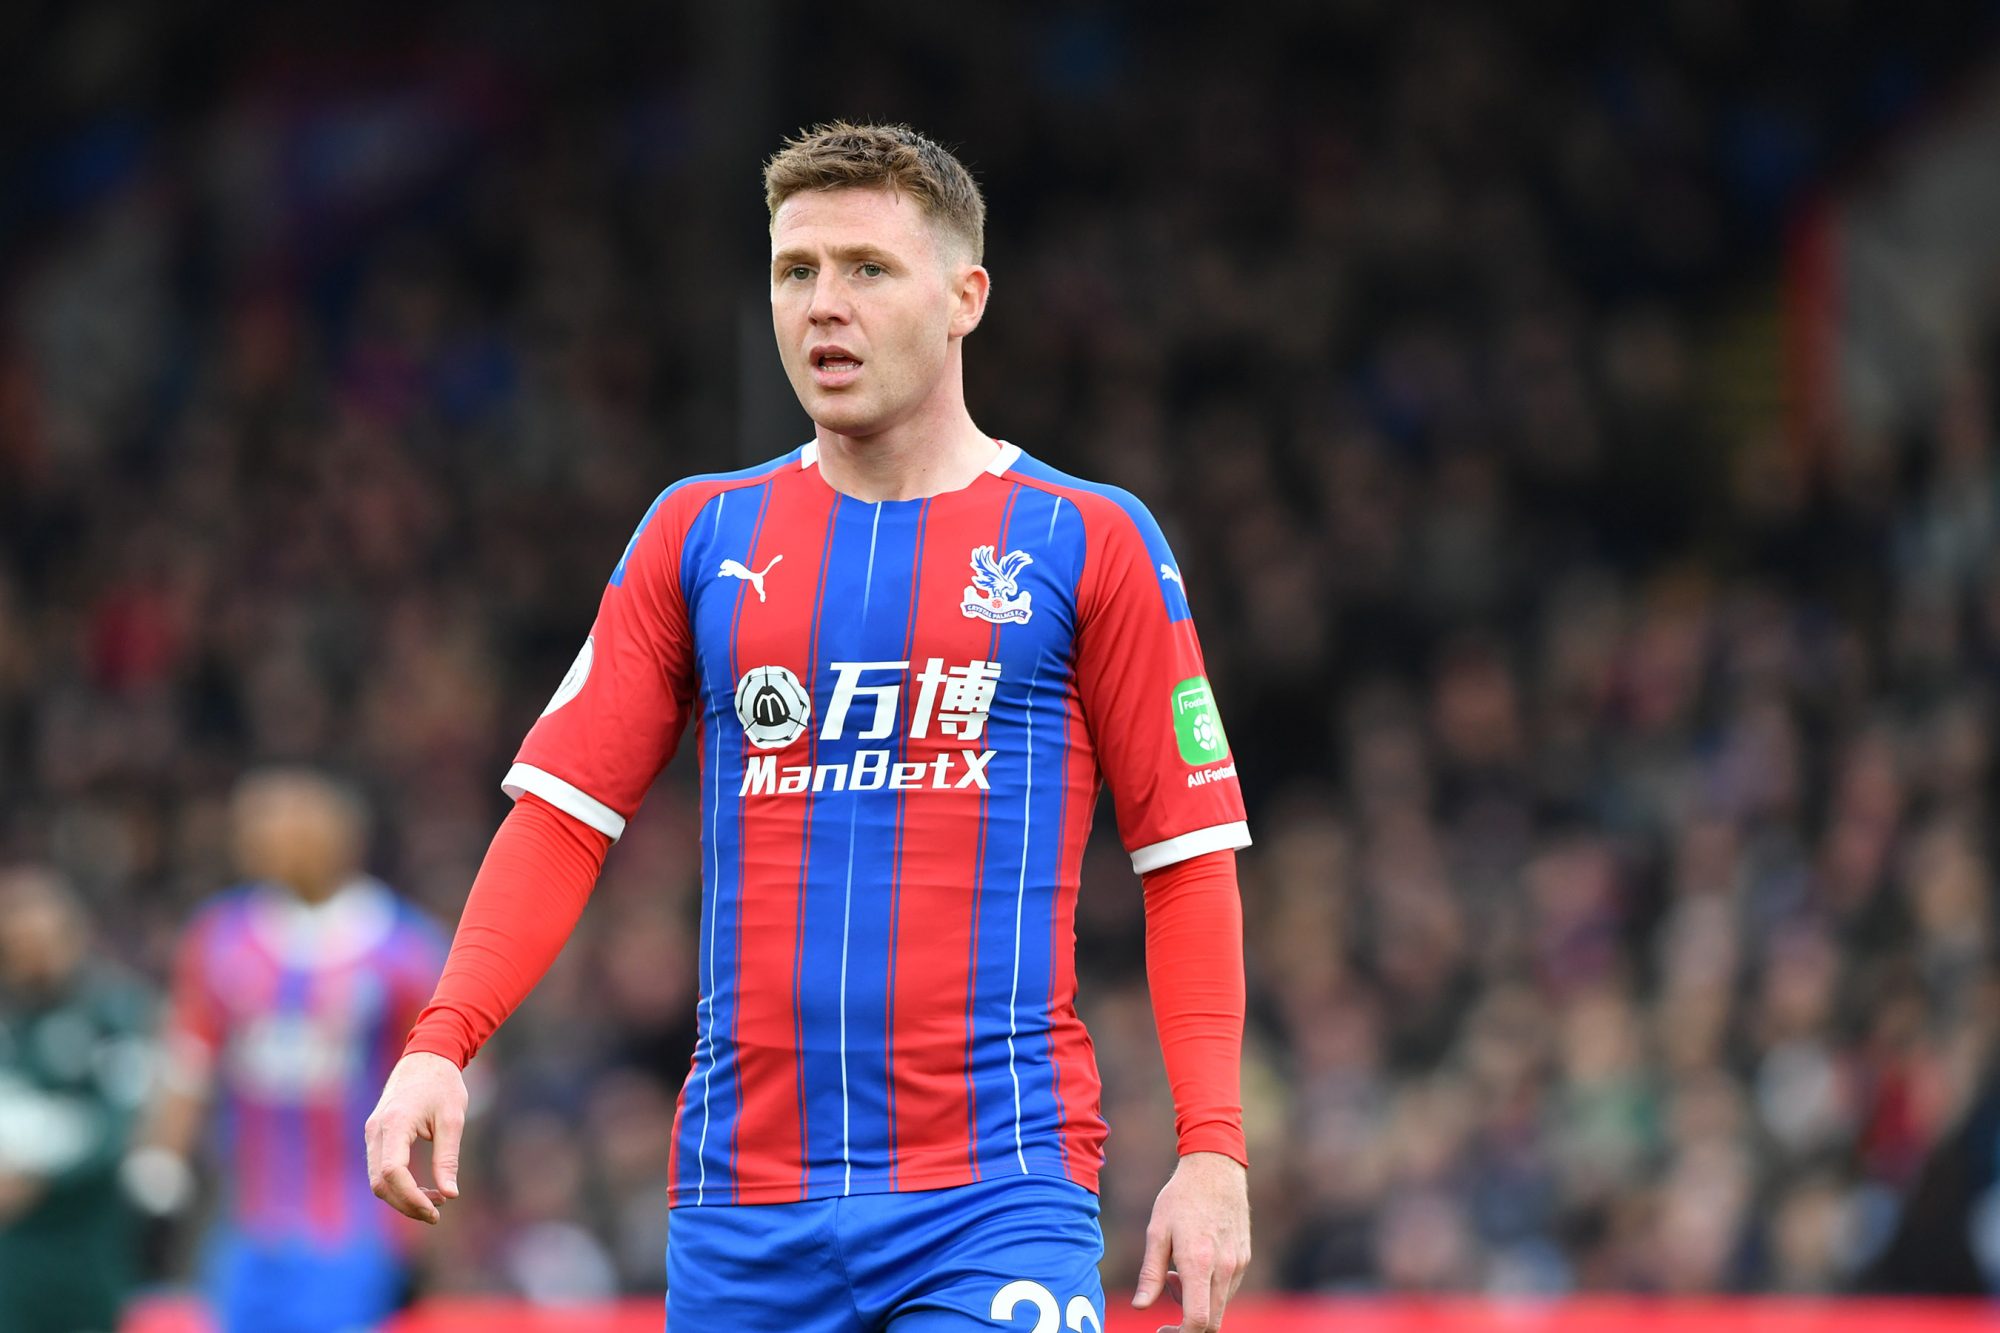 Crystal Palace midfielder James McCarthy: Glad to be back and hoping to  inspire fans at home – South London News